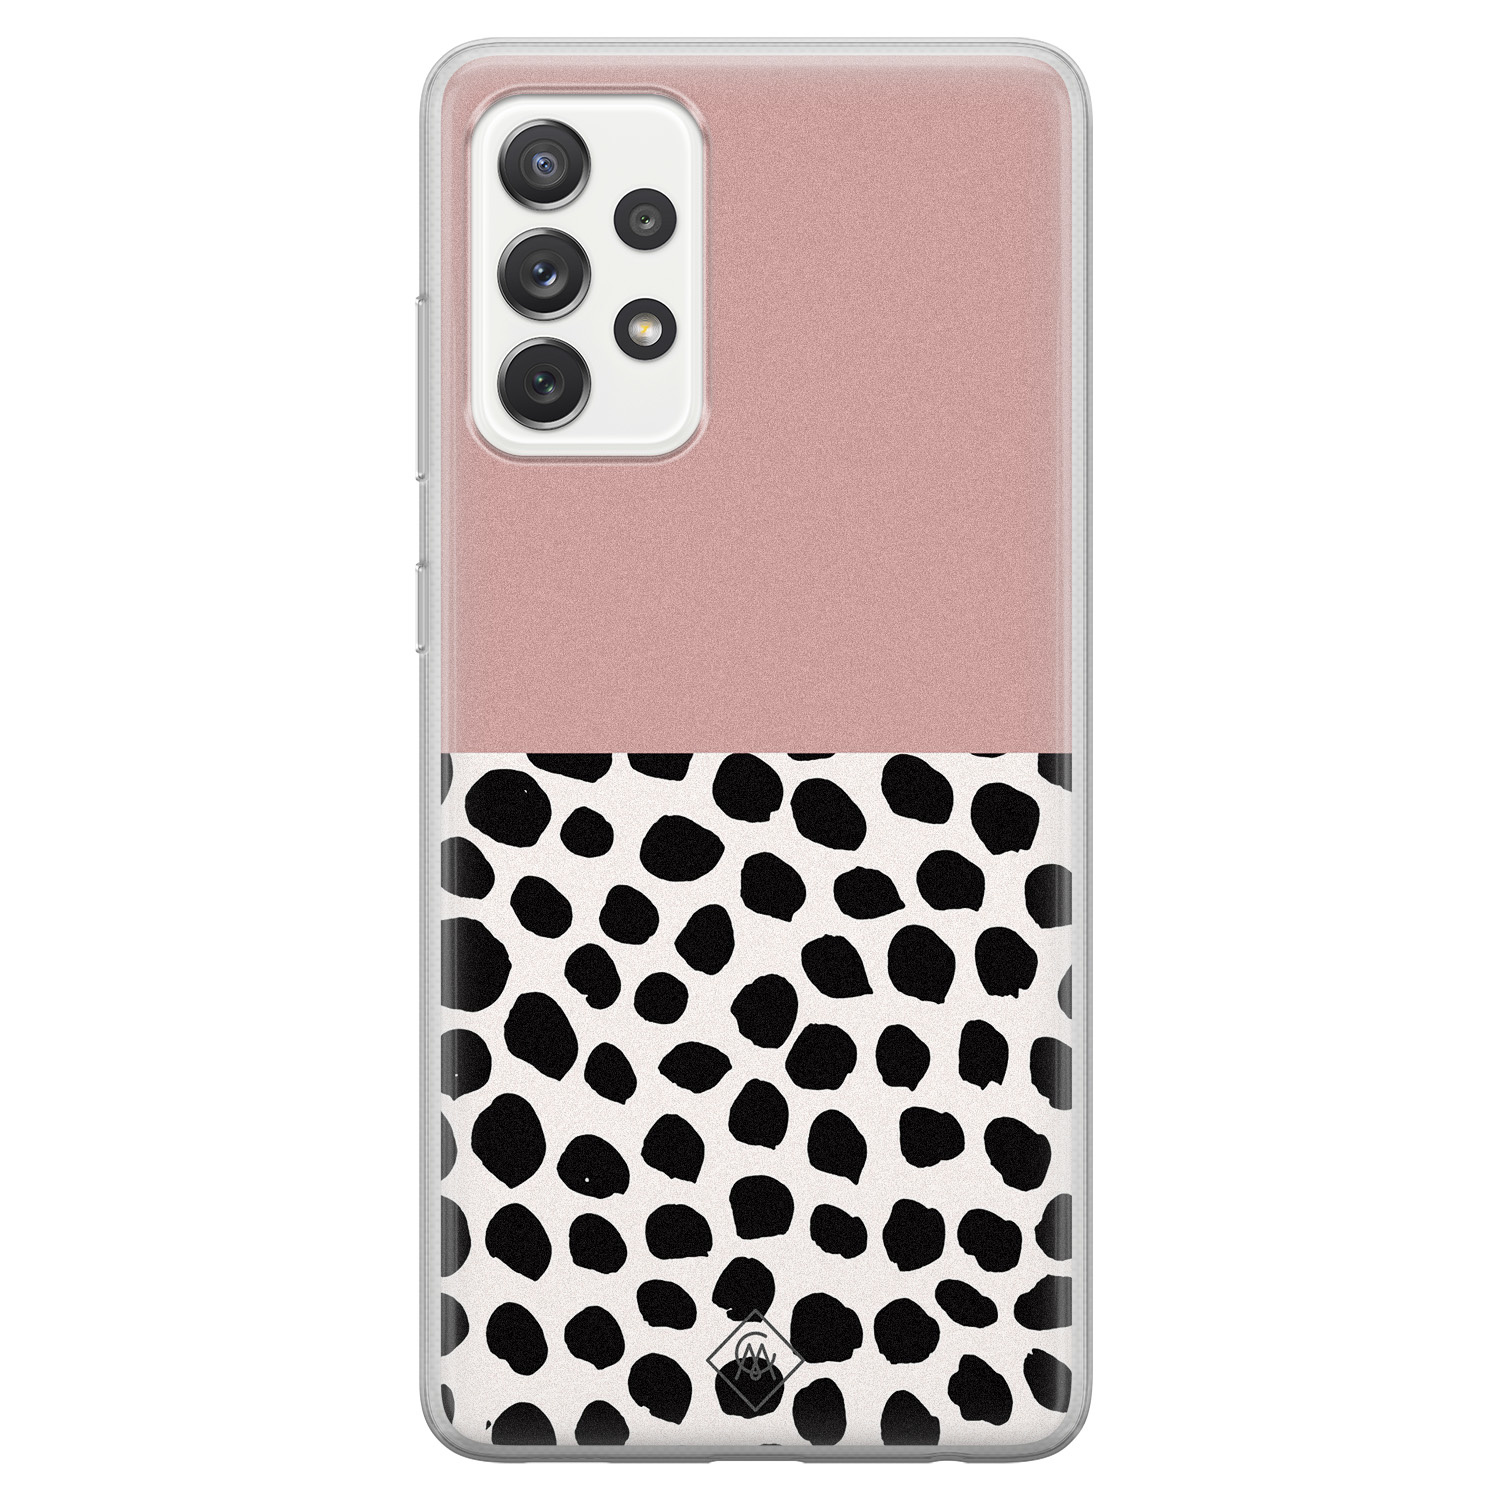 Samsung Galaxy A52s siliconen hoesje - Pink dots